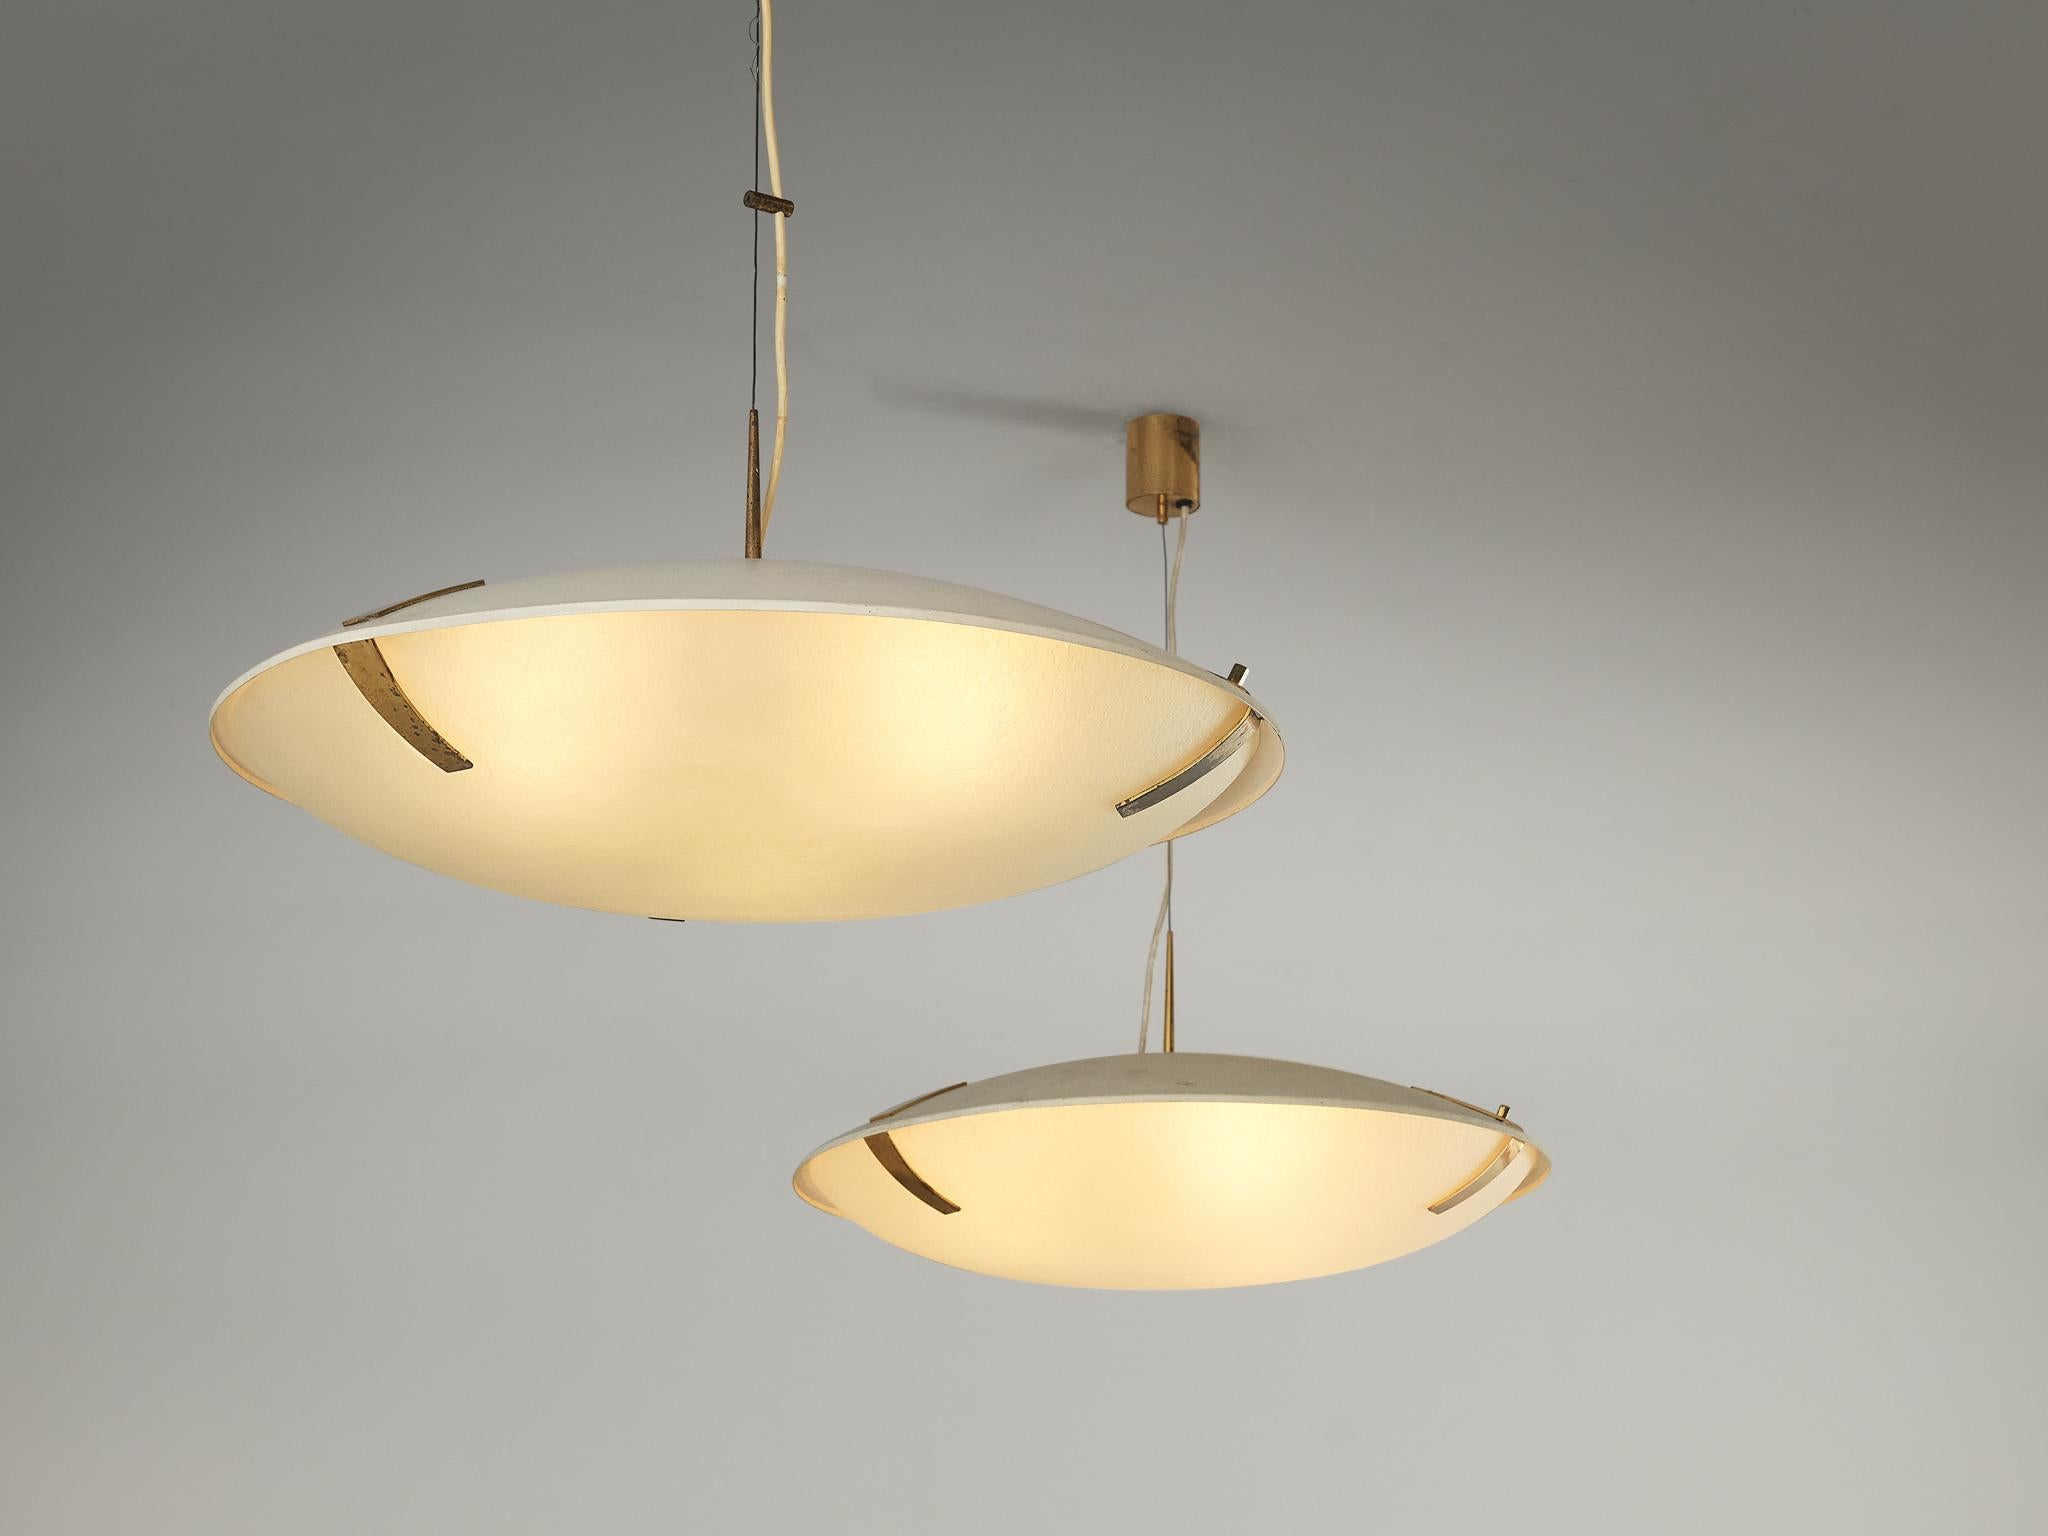 Stilnovo, pendants '1140', aluminium, glass, brass, Italy, circa 1960

Gorgeous chandeliers or pendants model '1140', produced by Stilnovo in the 1960s. These magnificent pieces of design consist out of a flat, oval shade and top with beautiful